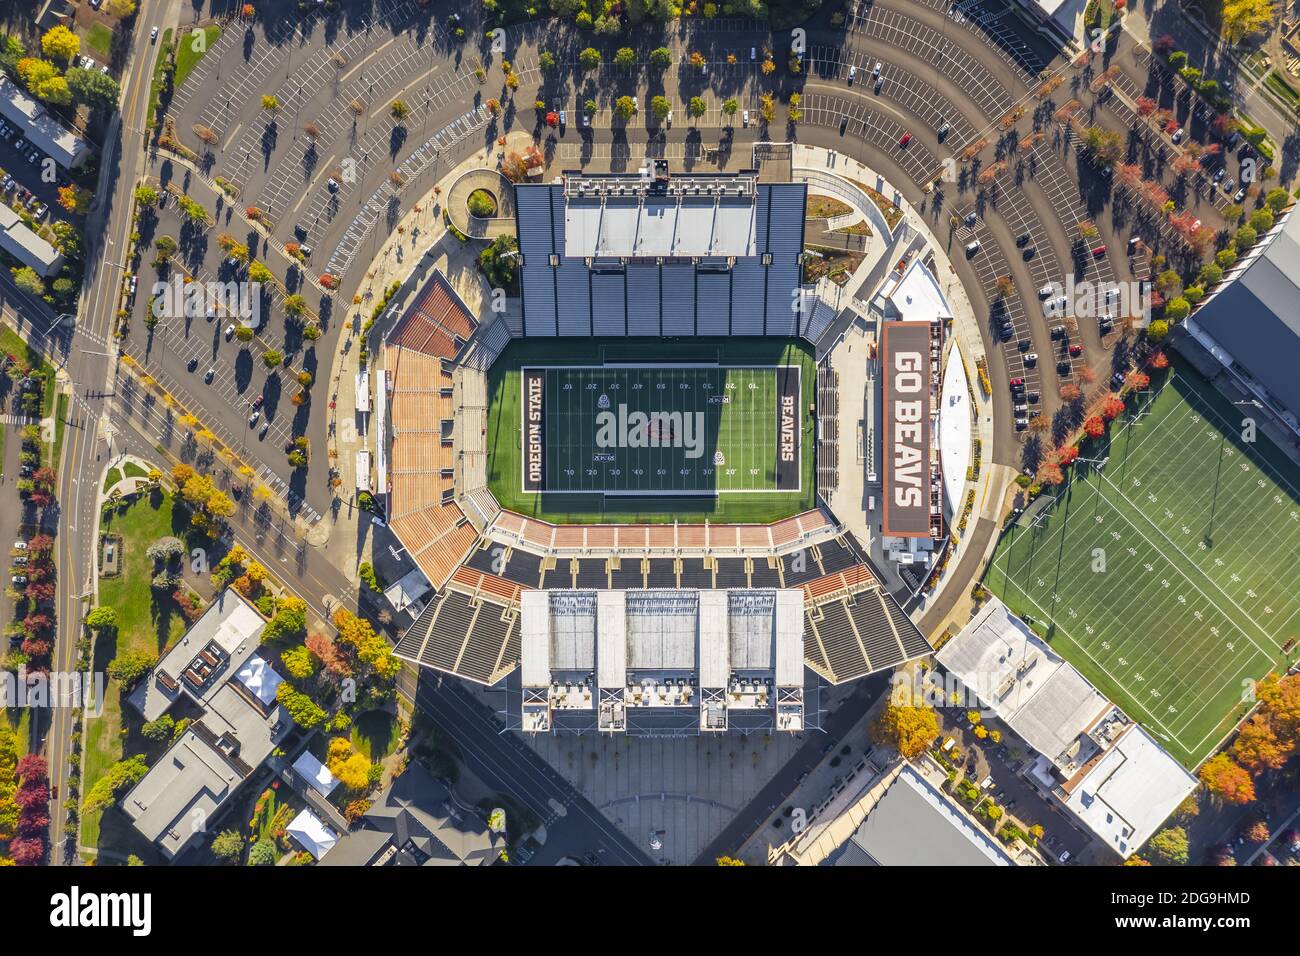 Aerial Views Of Reser Stadium On The Campus Of Oregon State University Stock Photo